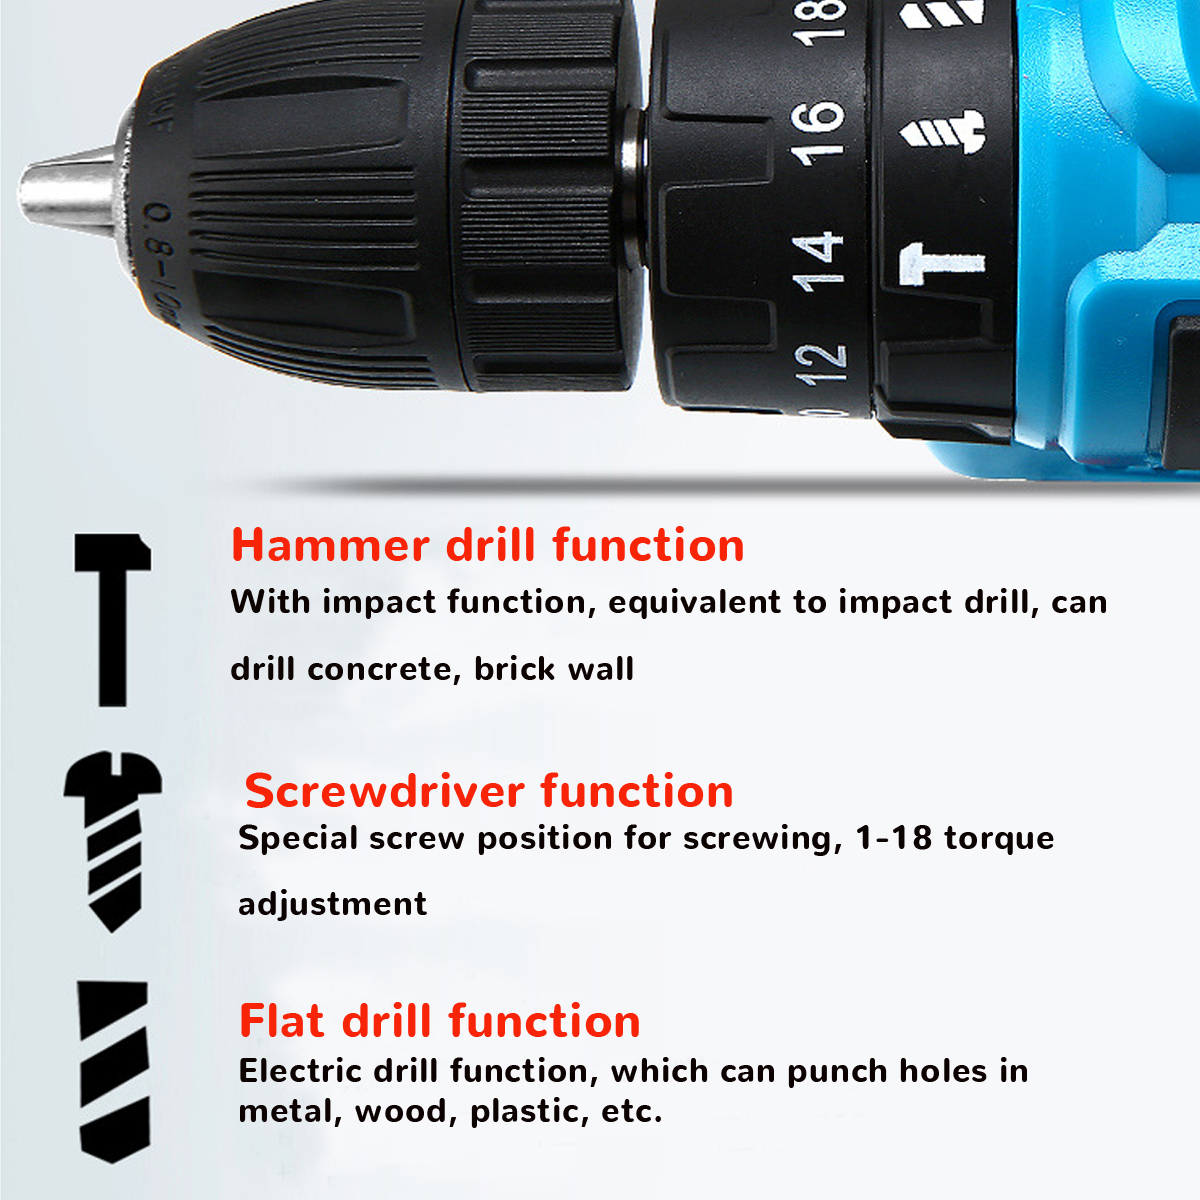 21V-Cordless-Impact-Power-Drill-Electric-Screwdriver-Set-with-2-Li-ion-Batteries-1372018-5